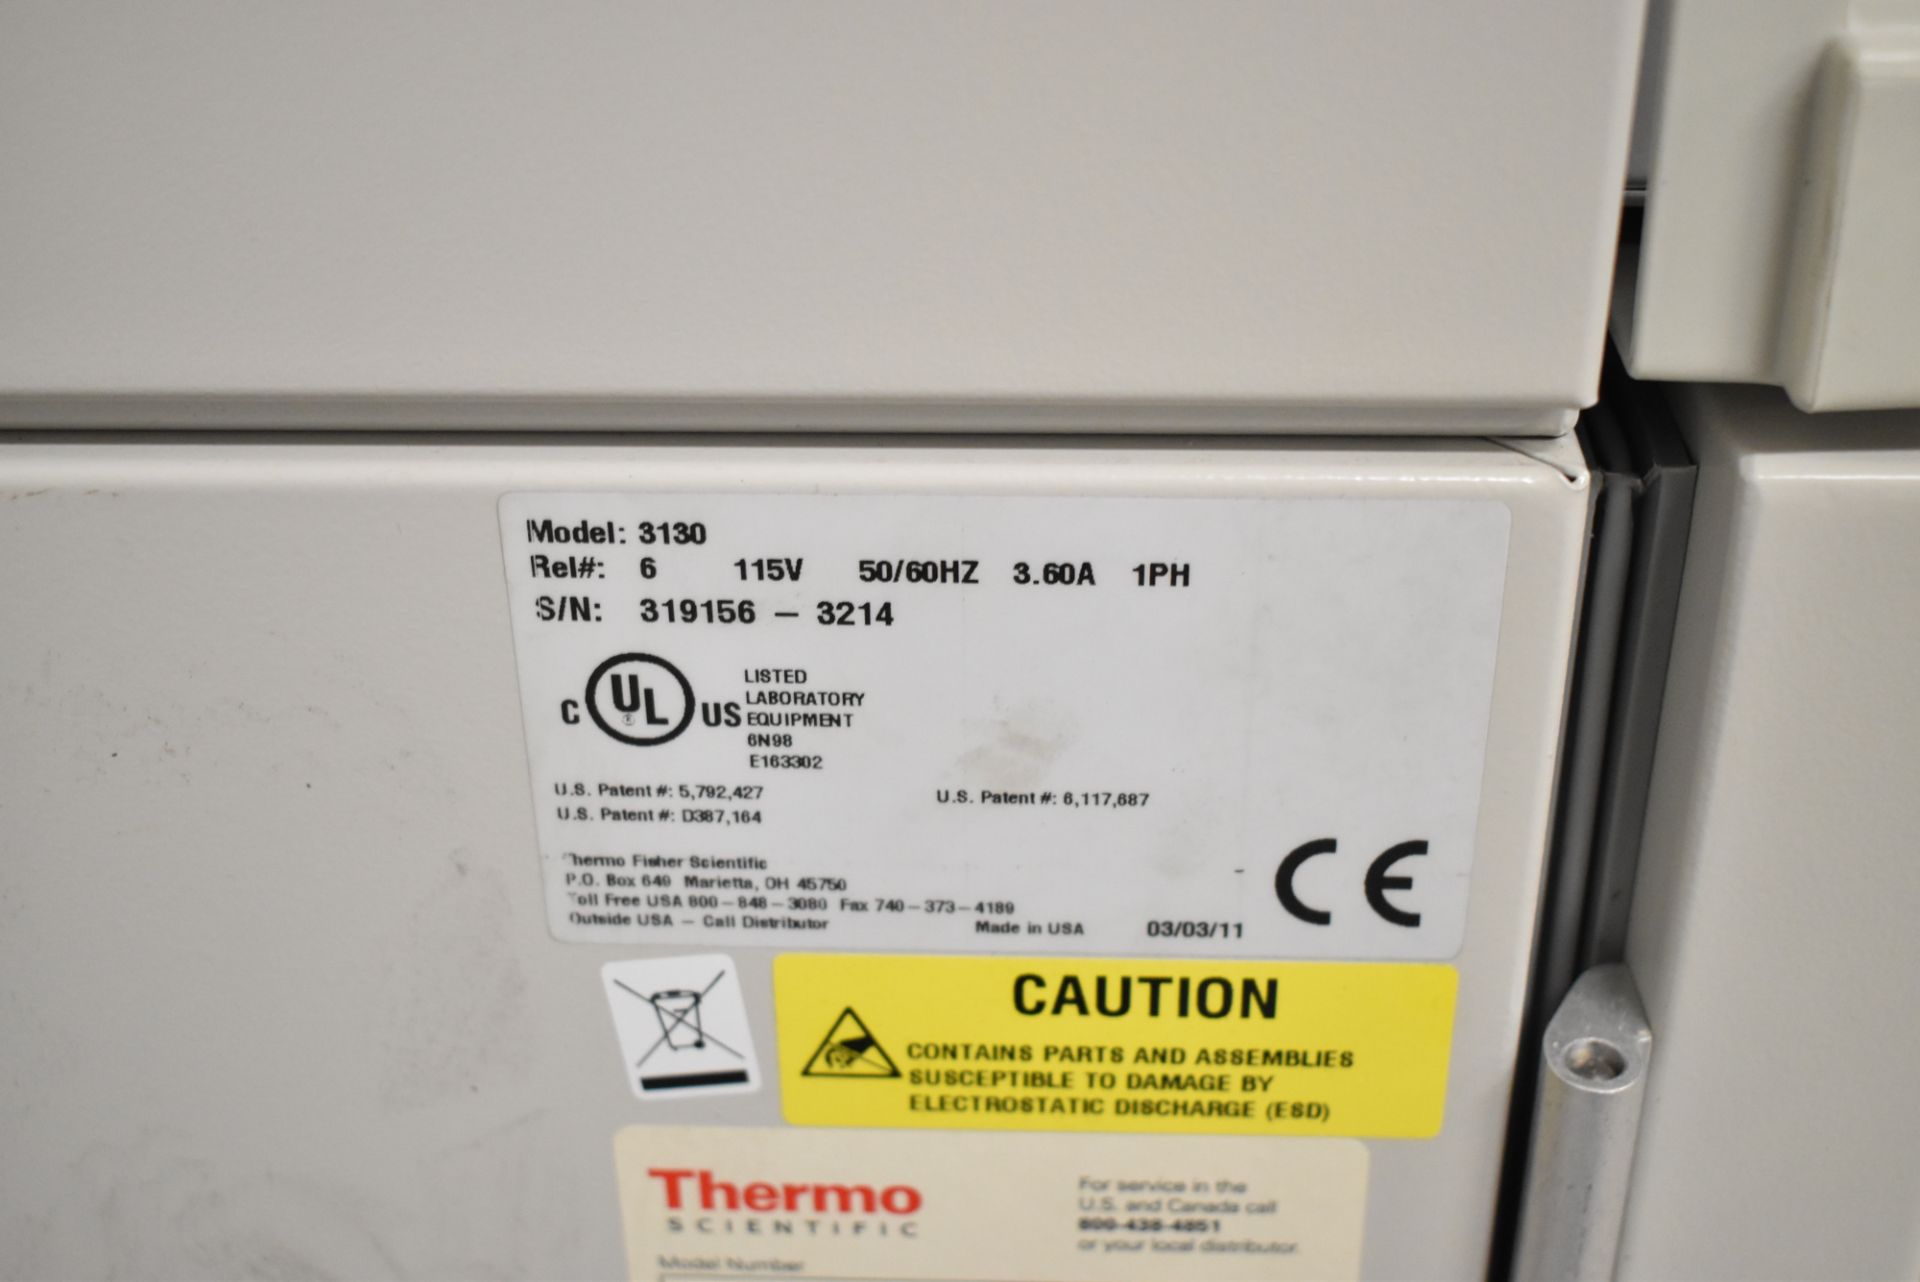 THERMO SCIENTIFIC 3130 FORMA SERIES II WATER JACKET CO2 INCUBATOR WITH DIGITAL MICROPROCESSOR - Image 8 of 8